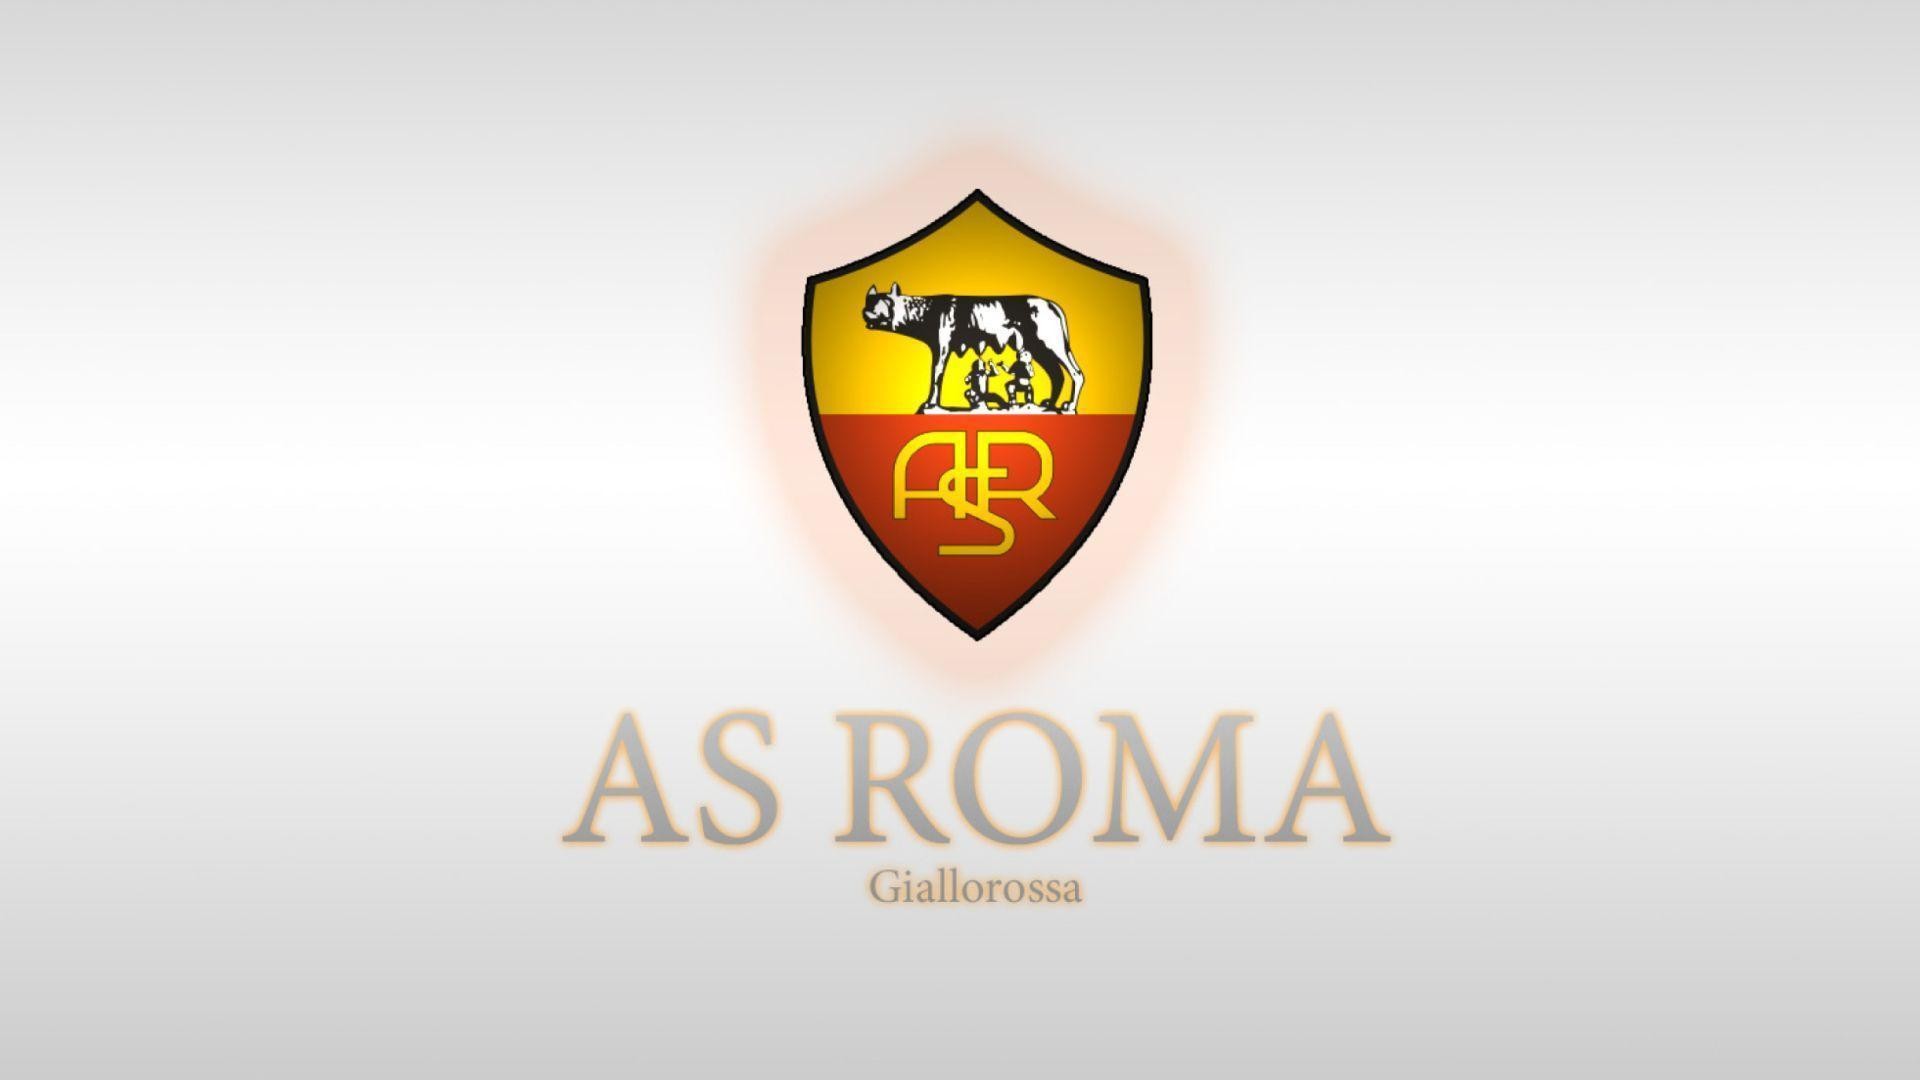 AS Roma Wallpaper For Mac Backgrounds with high-resolution 1920x1080 pixel. You can use this wallpaper for your Desktop Computers, Mac Screensavers, Windows Backgrounds, iPhone Wallpapers, Tablet or Android Lock screen and another Mobile device